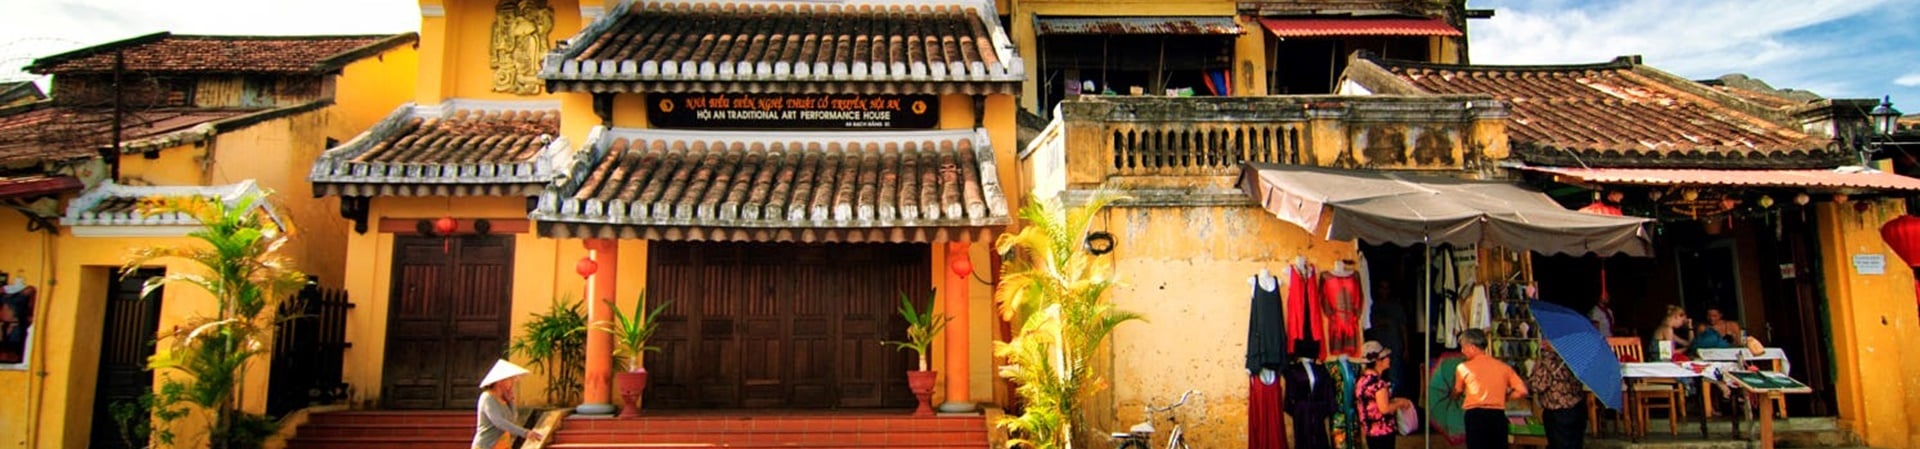 Image of Hidden Streets of Hoi An